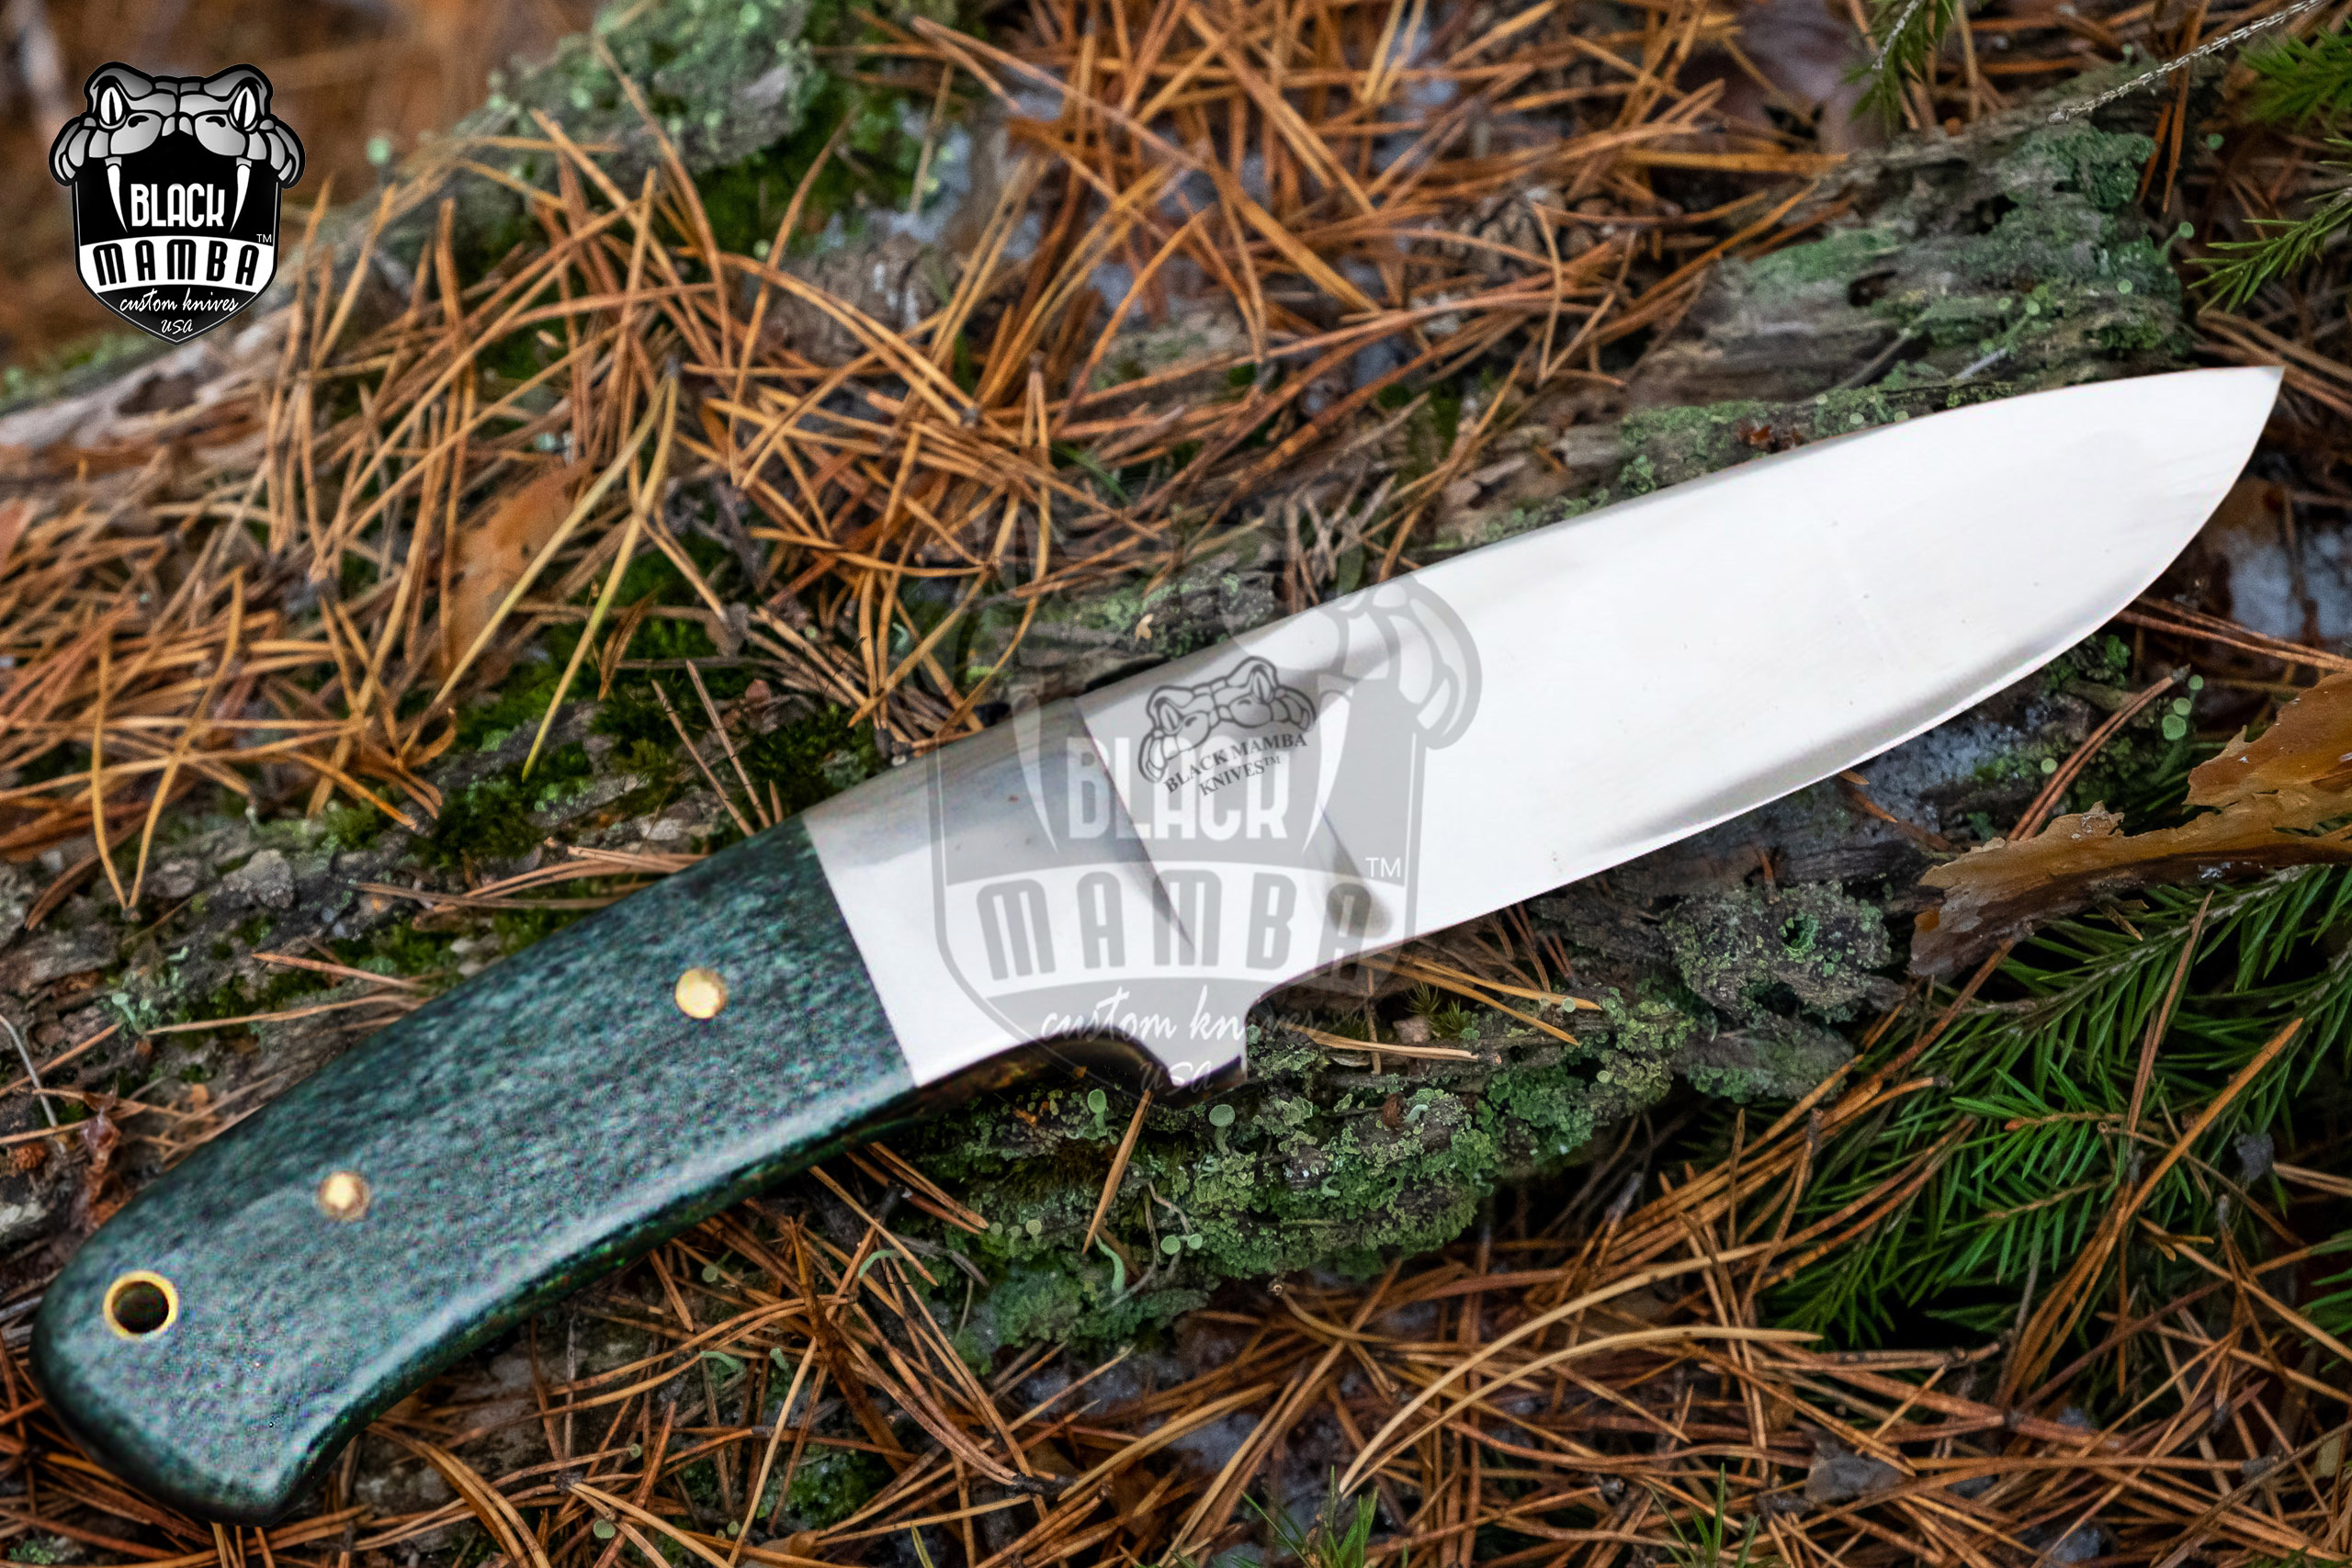 BMK-144 Green Fish Knife stainless steel Fixed Blade Hunting Bowie